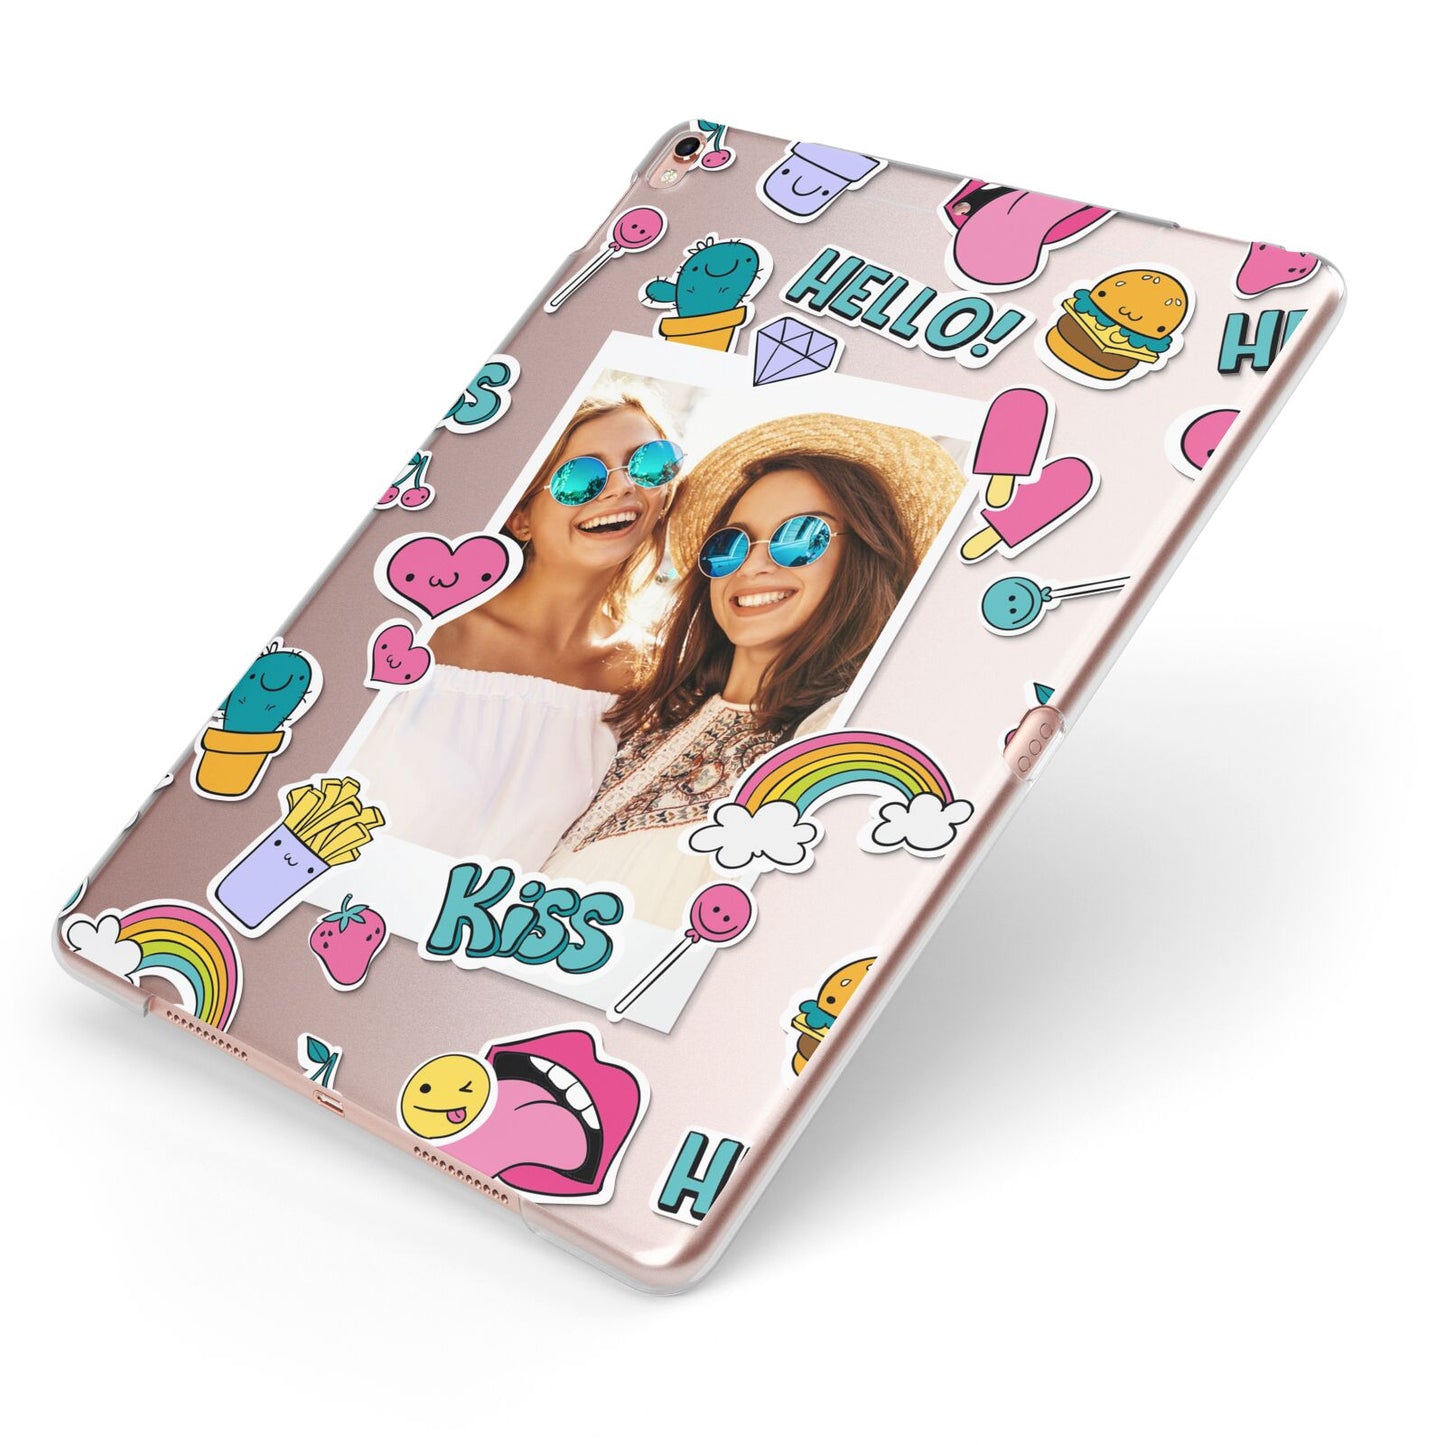 Photo Cute Stickers Apple iPad Case on Rose Gold iPad Side View